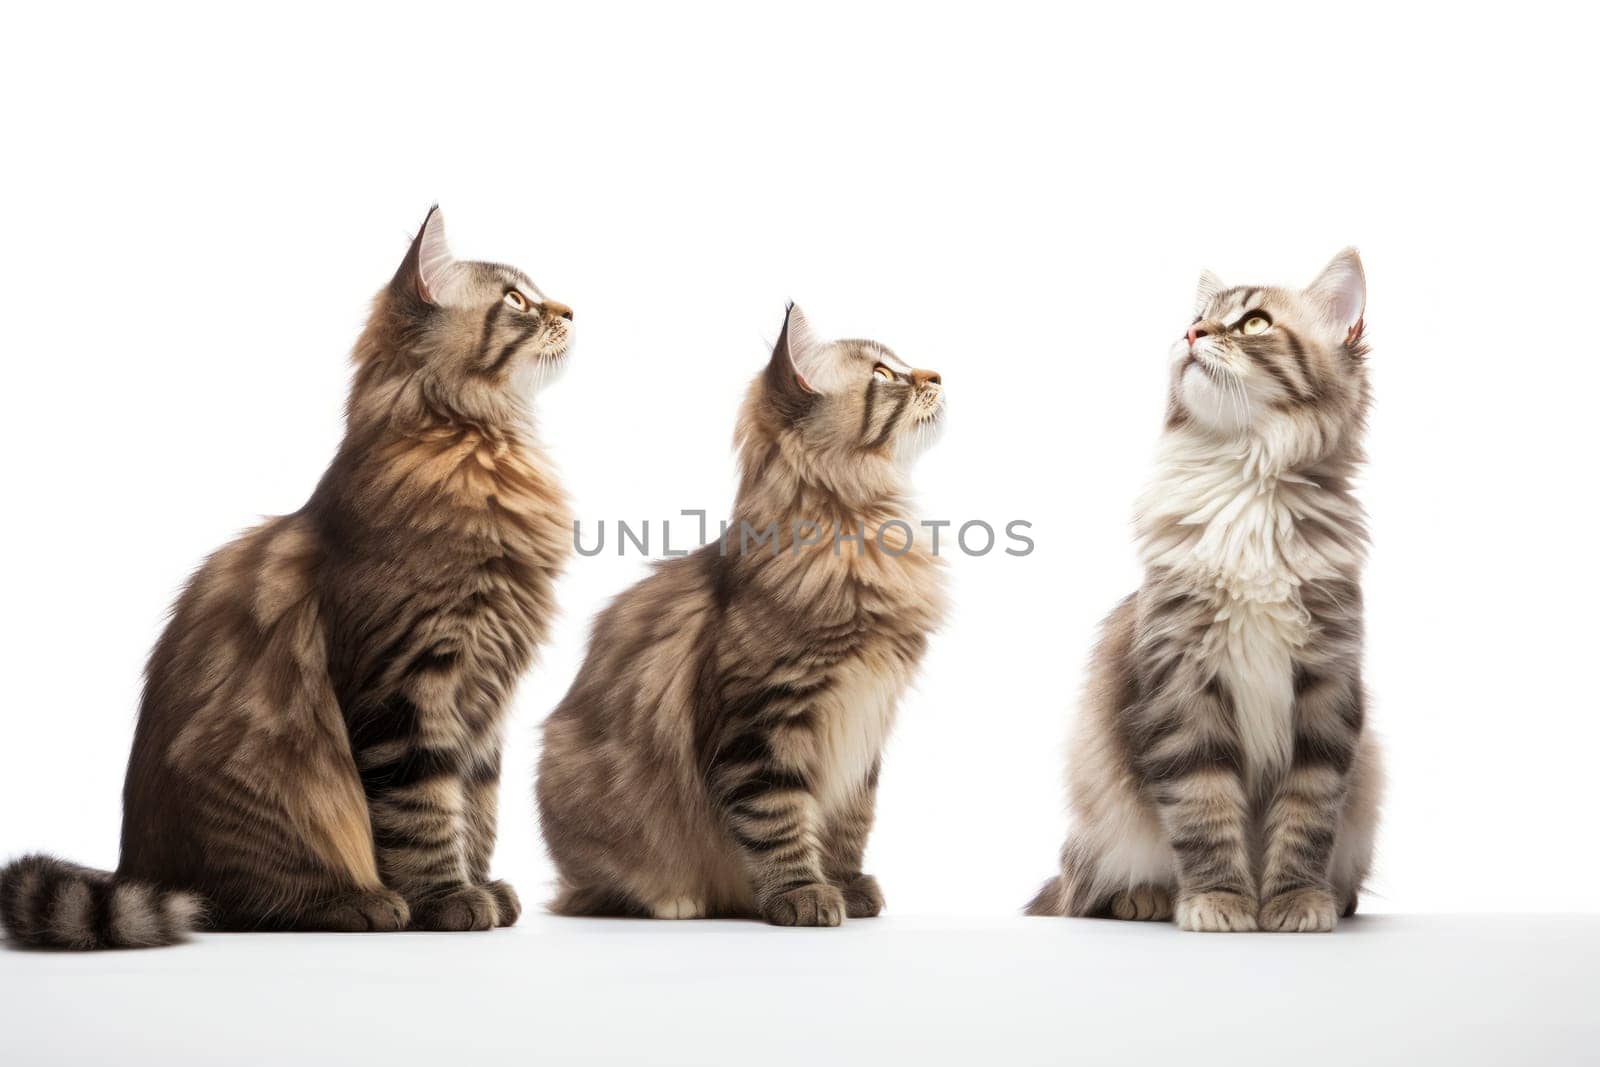 Three Maine Coon cats sitting and looking up, isolated on a white background by andreyz